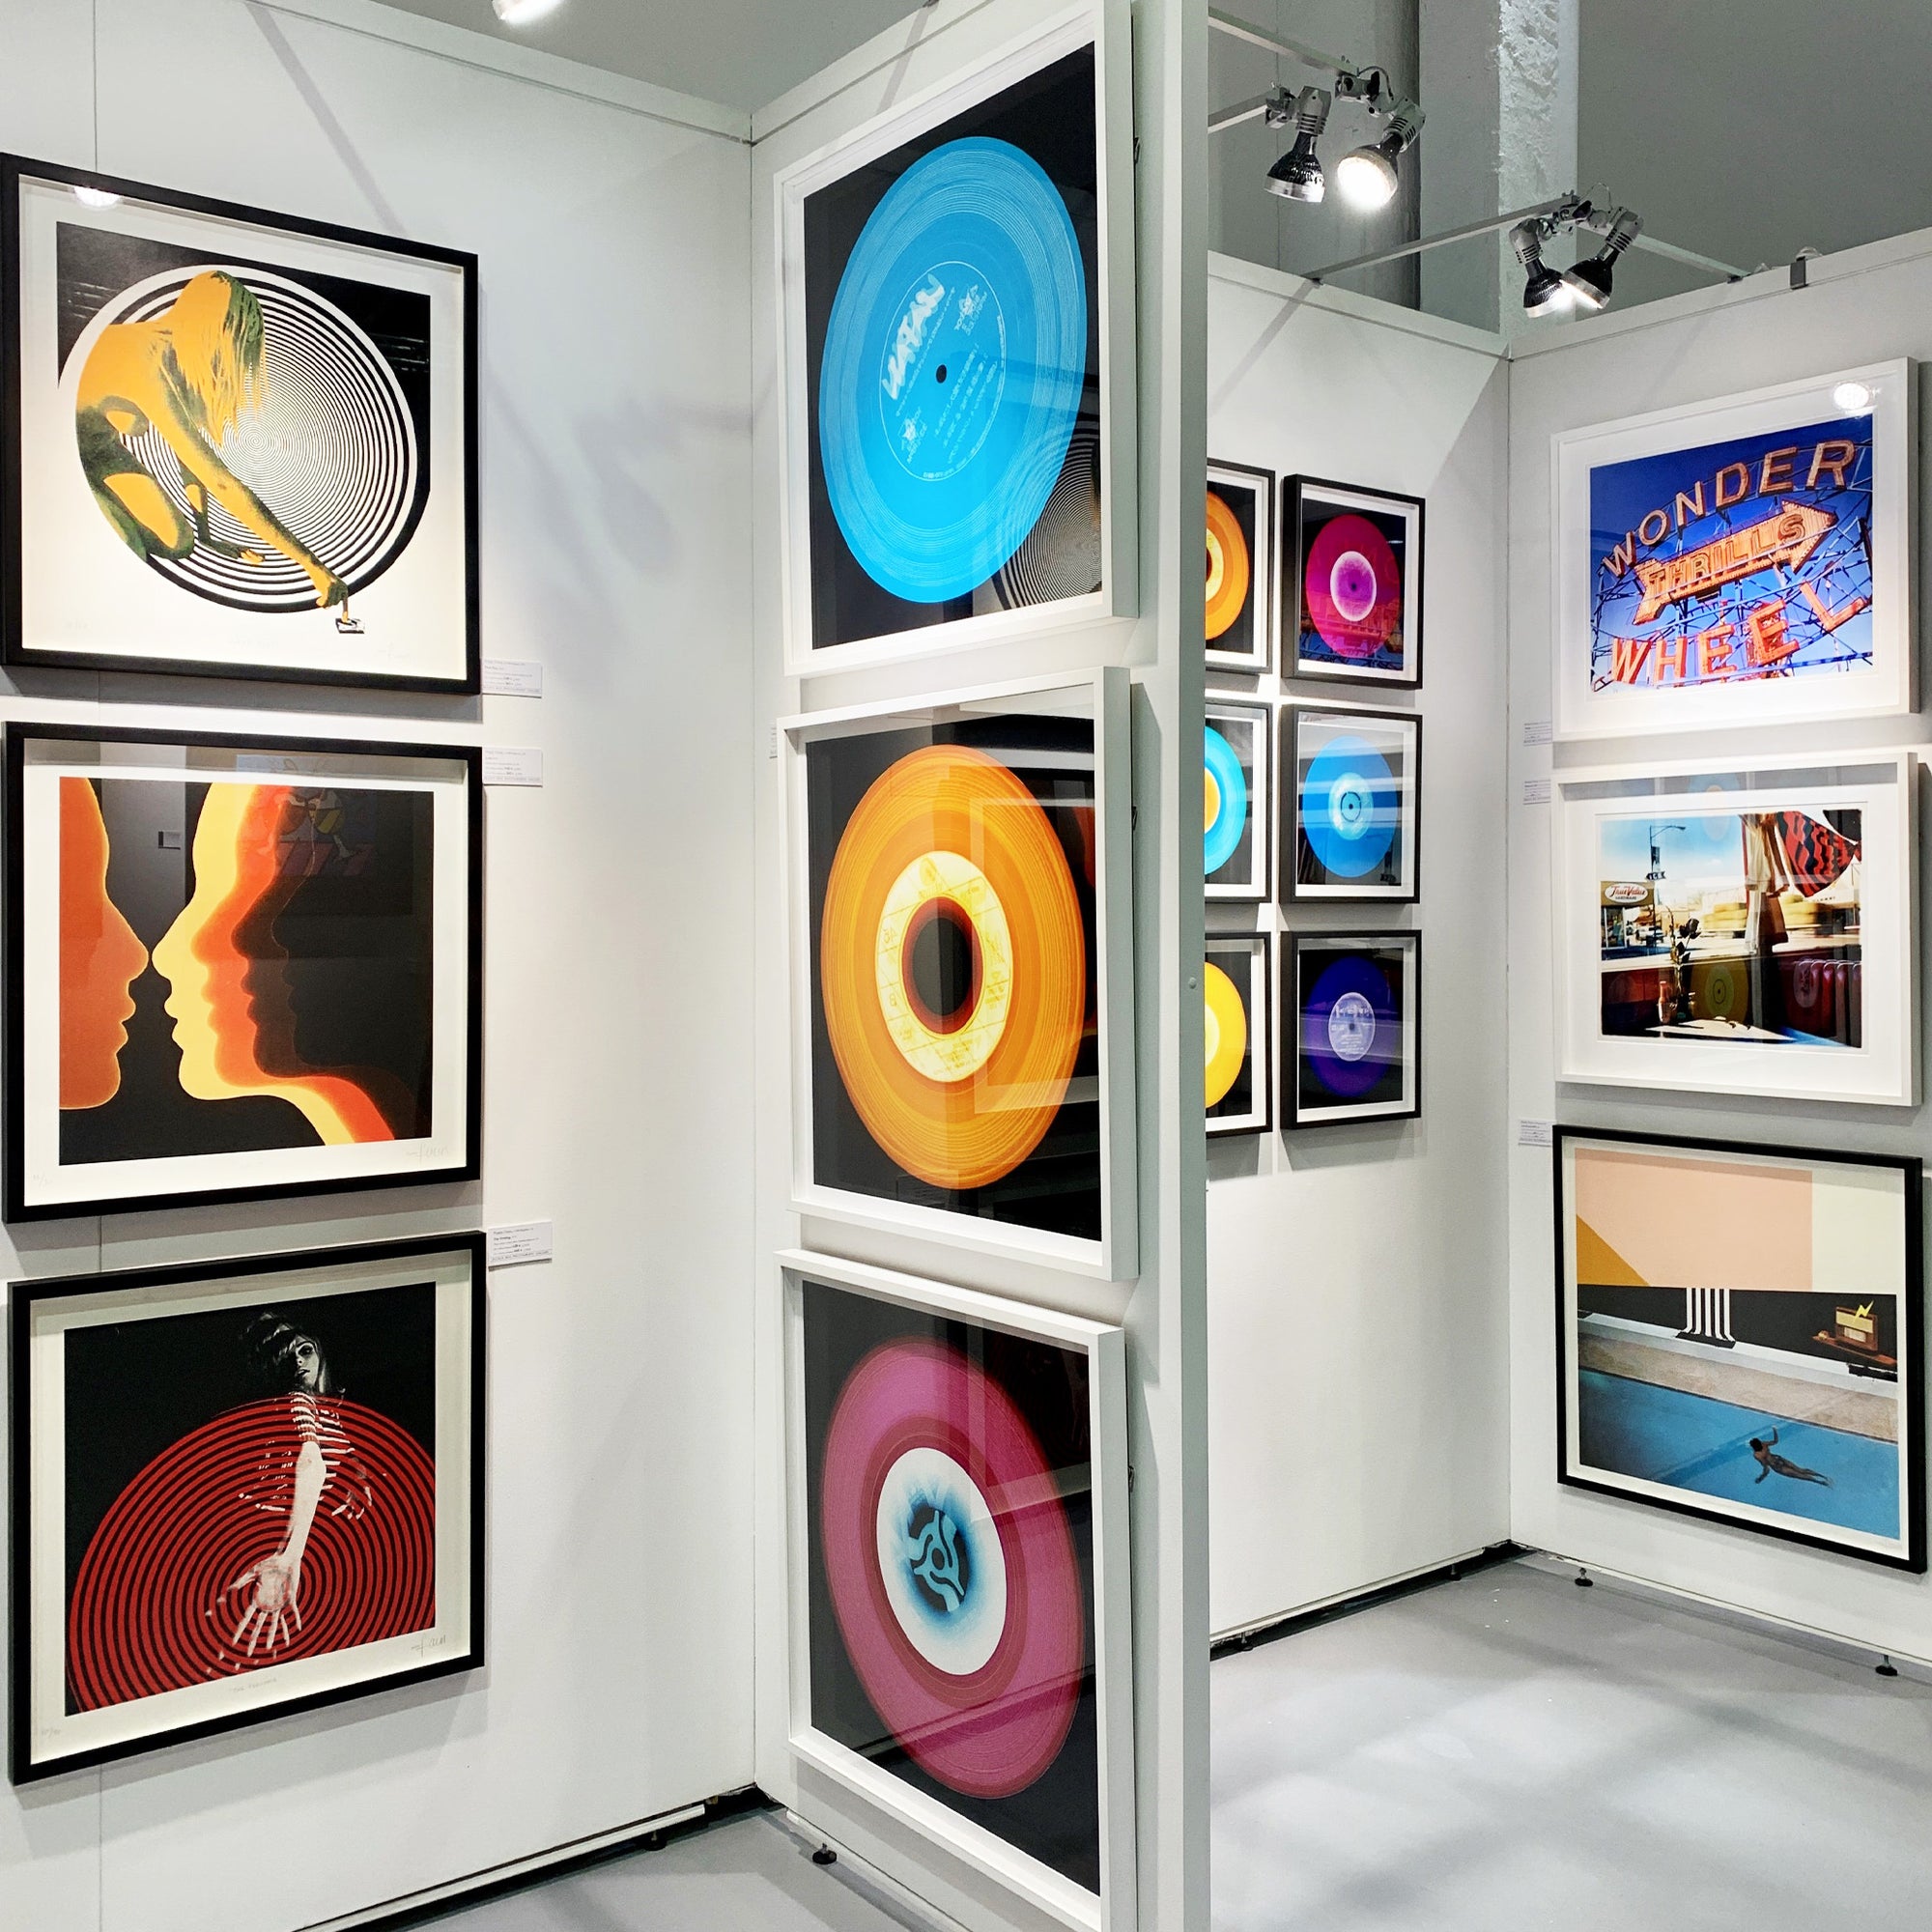 Vinyl Collection 'White Label'. Acclaimed contemporary photographers, Richard Heeps and Natasha Heidler have collaborated to make this beautifully mesmerising collection. A celebration of the vinyl record and analogue technology, which reflects the artists practice within photography.